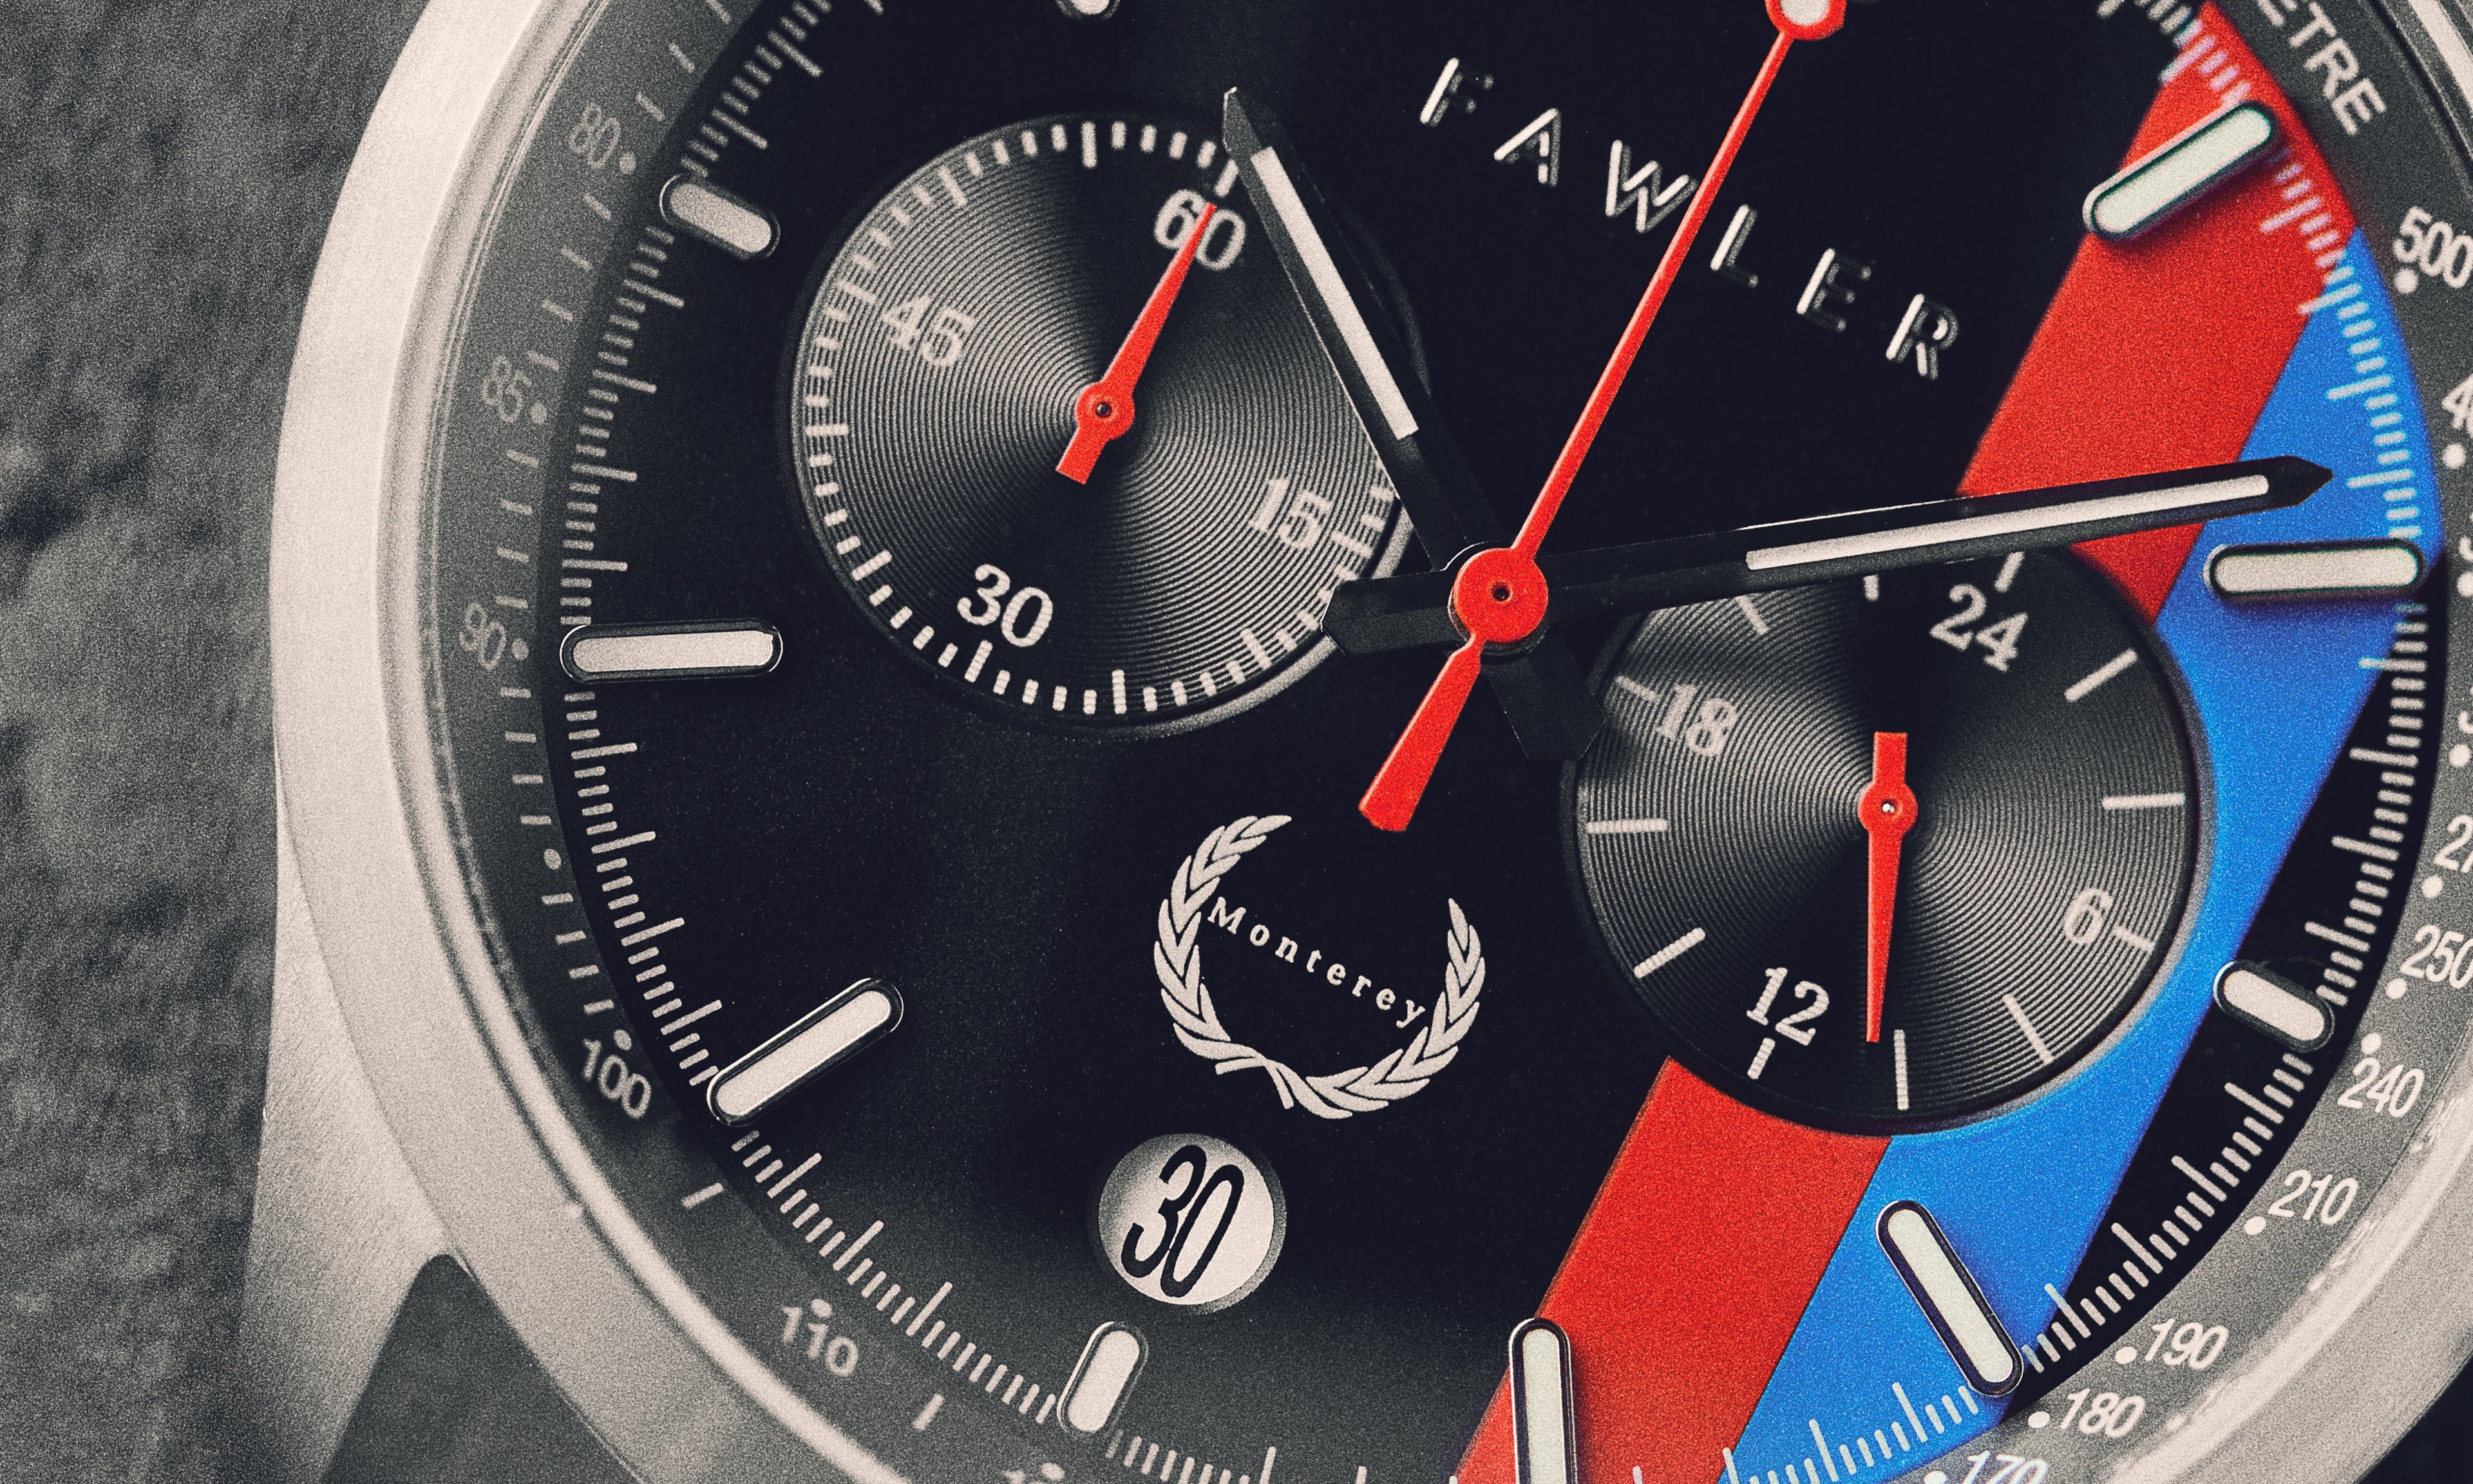 Classic racing inspired watches